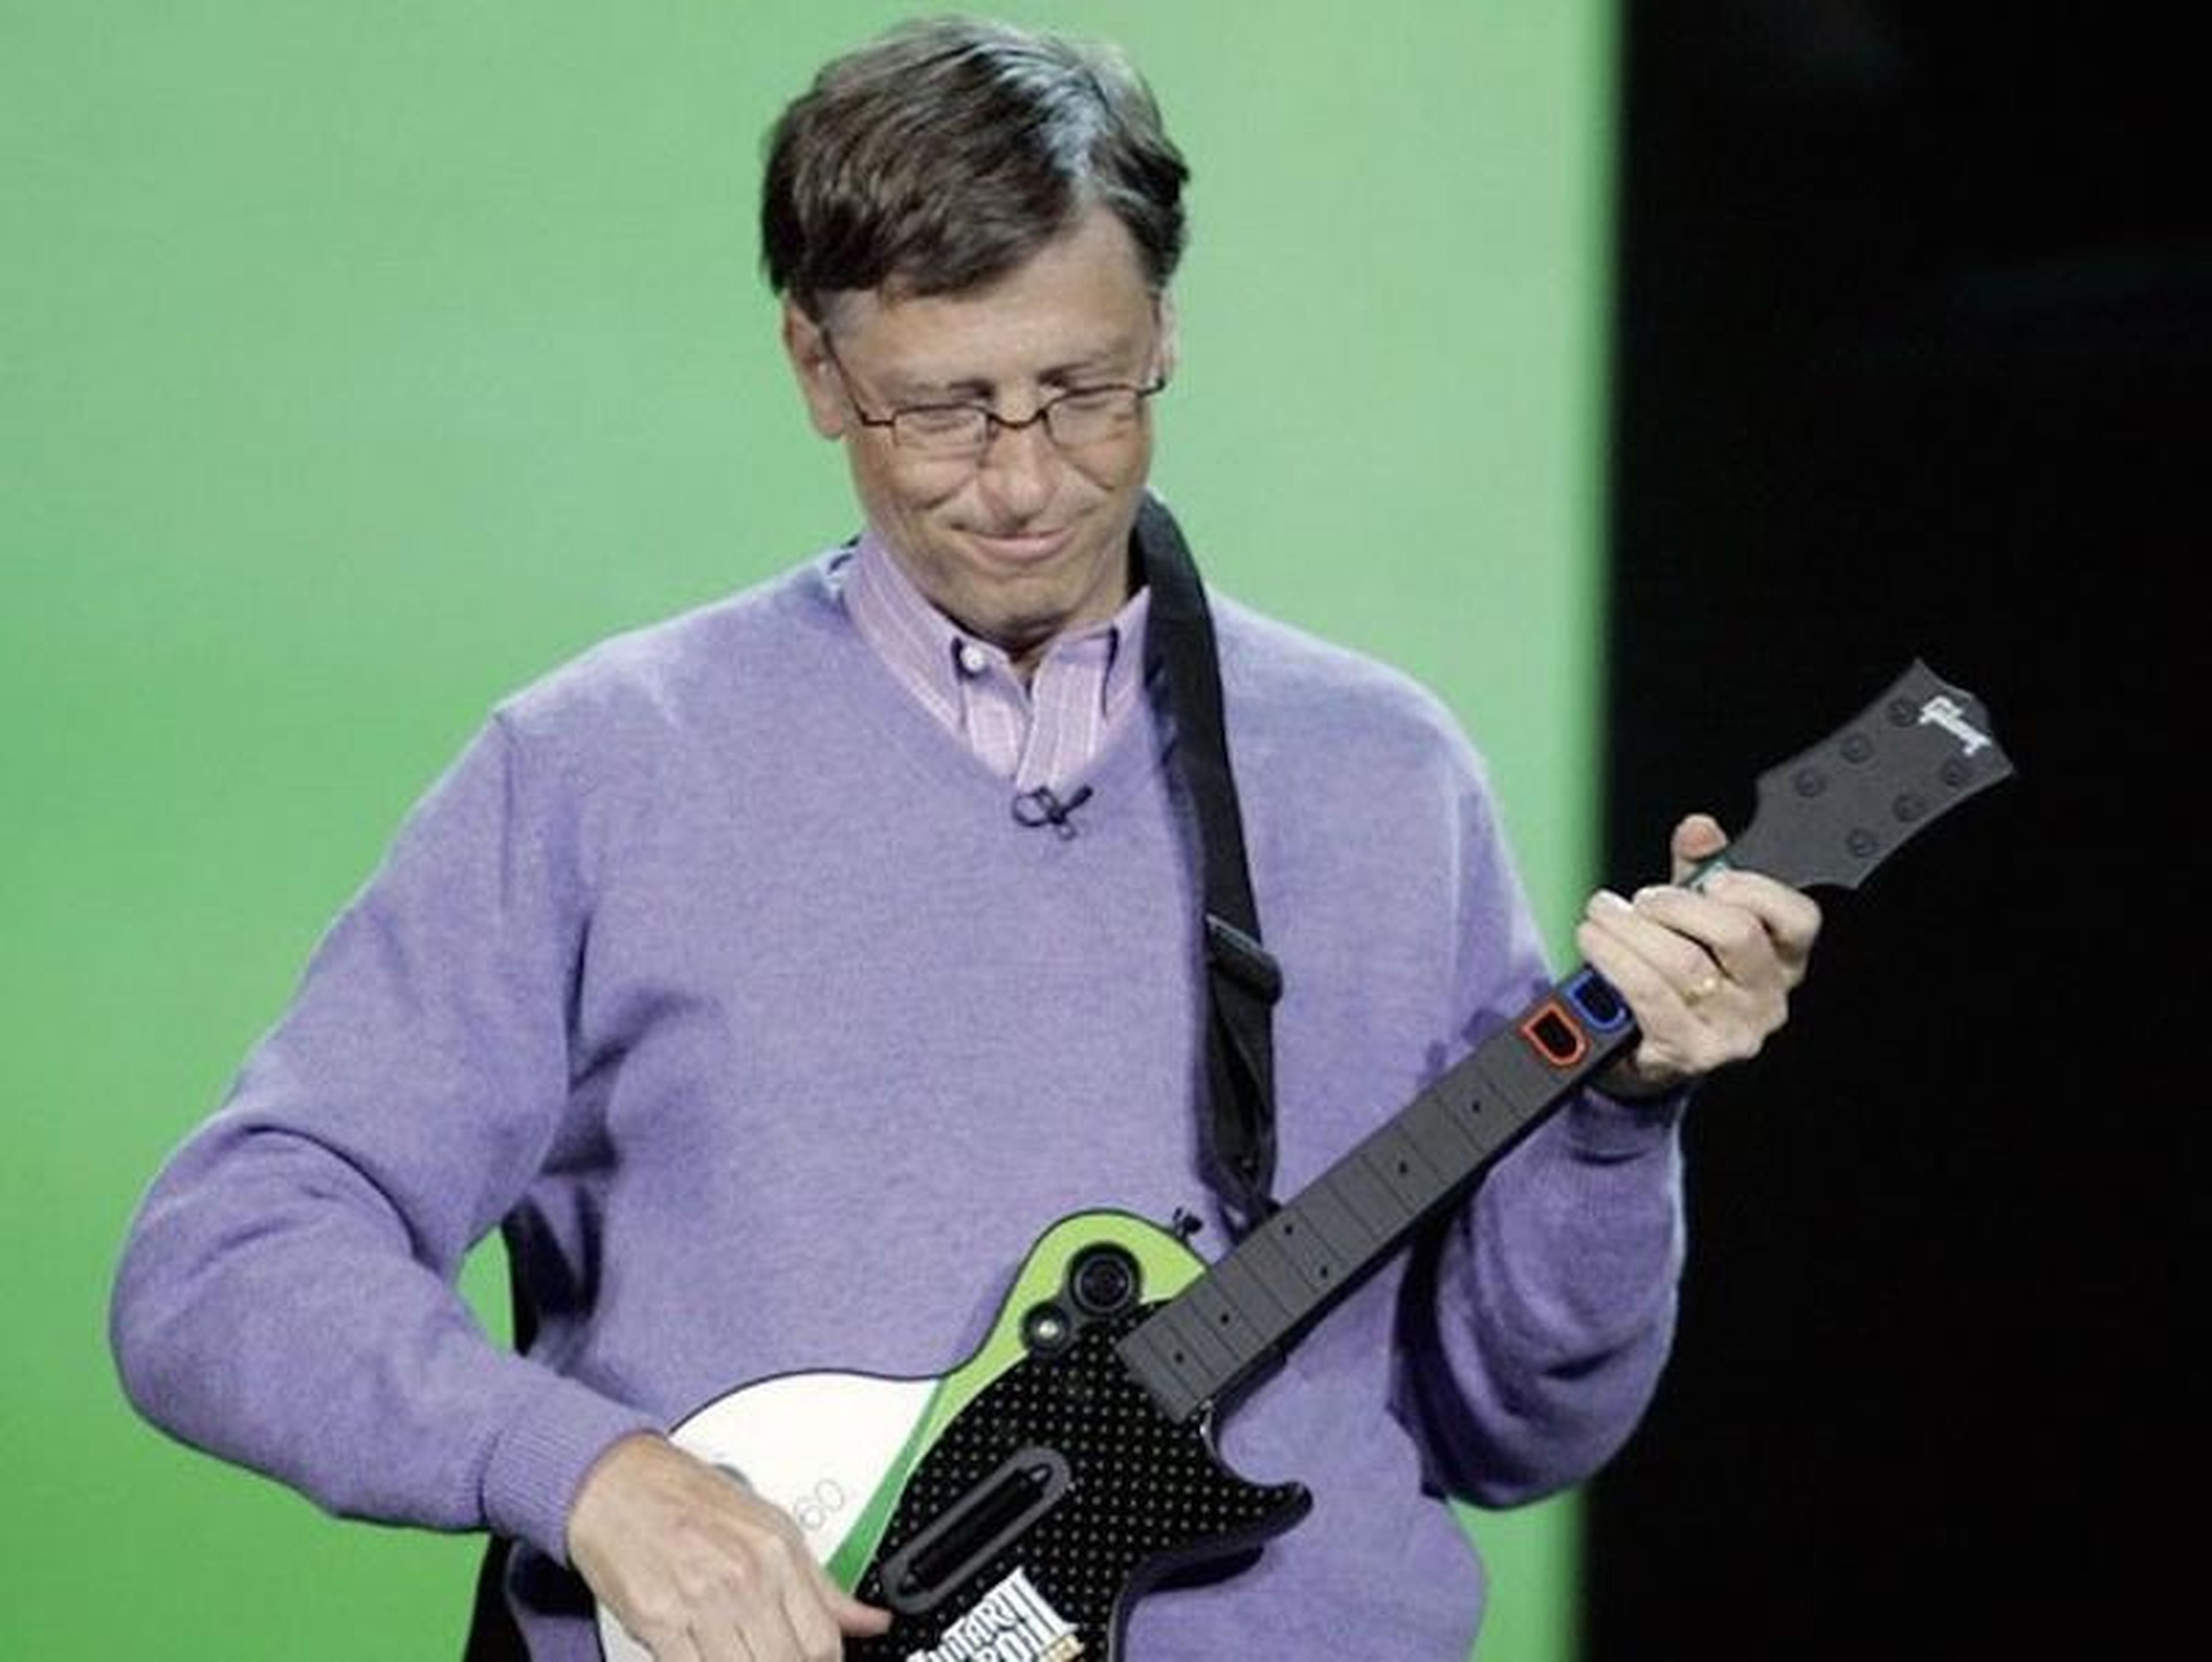 15. Bill Gates' favorite band? Weezer. He also calls U2 a "favorite" and says he's still "waiting for Spinal Tap to go back on tour."